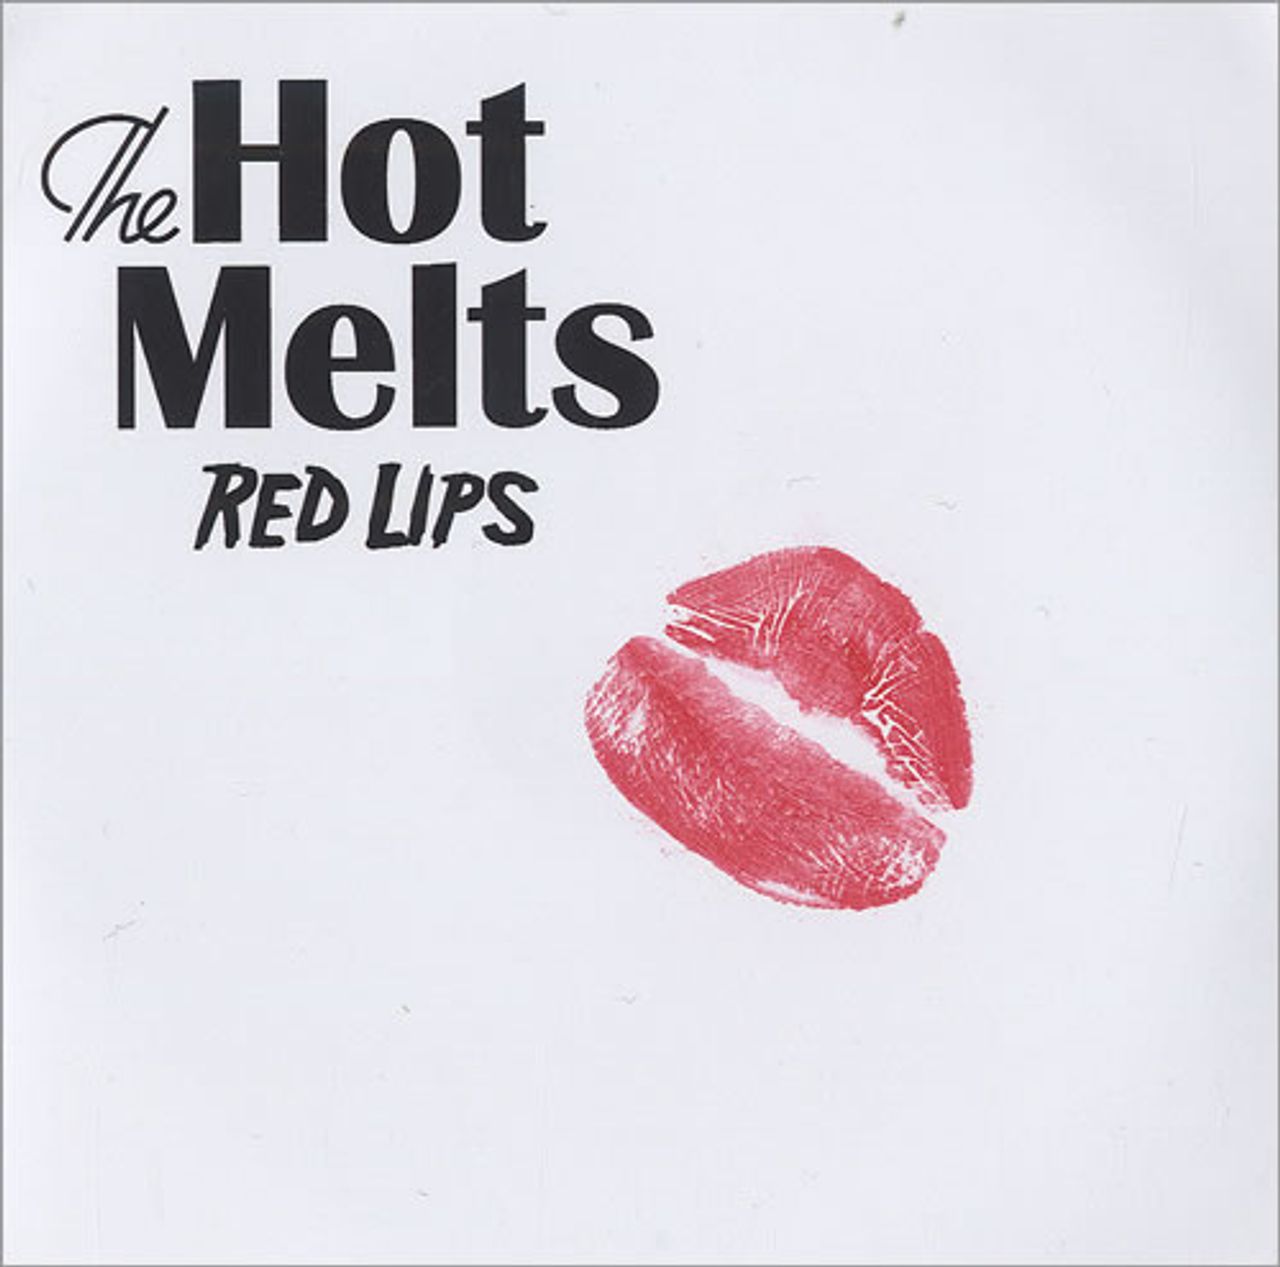 The Hot Melts Red Lips UK Promo CD-R acetate CD-R ACETATE